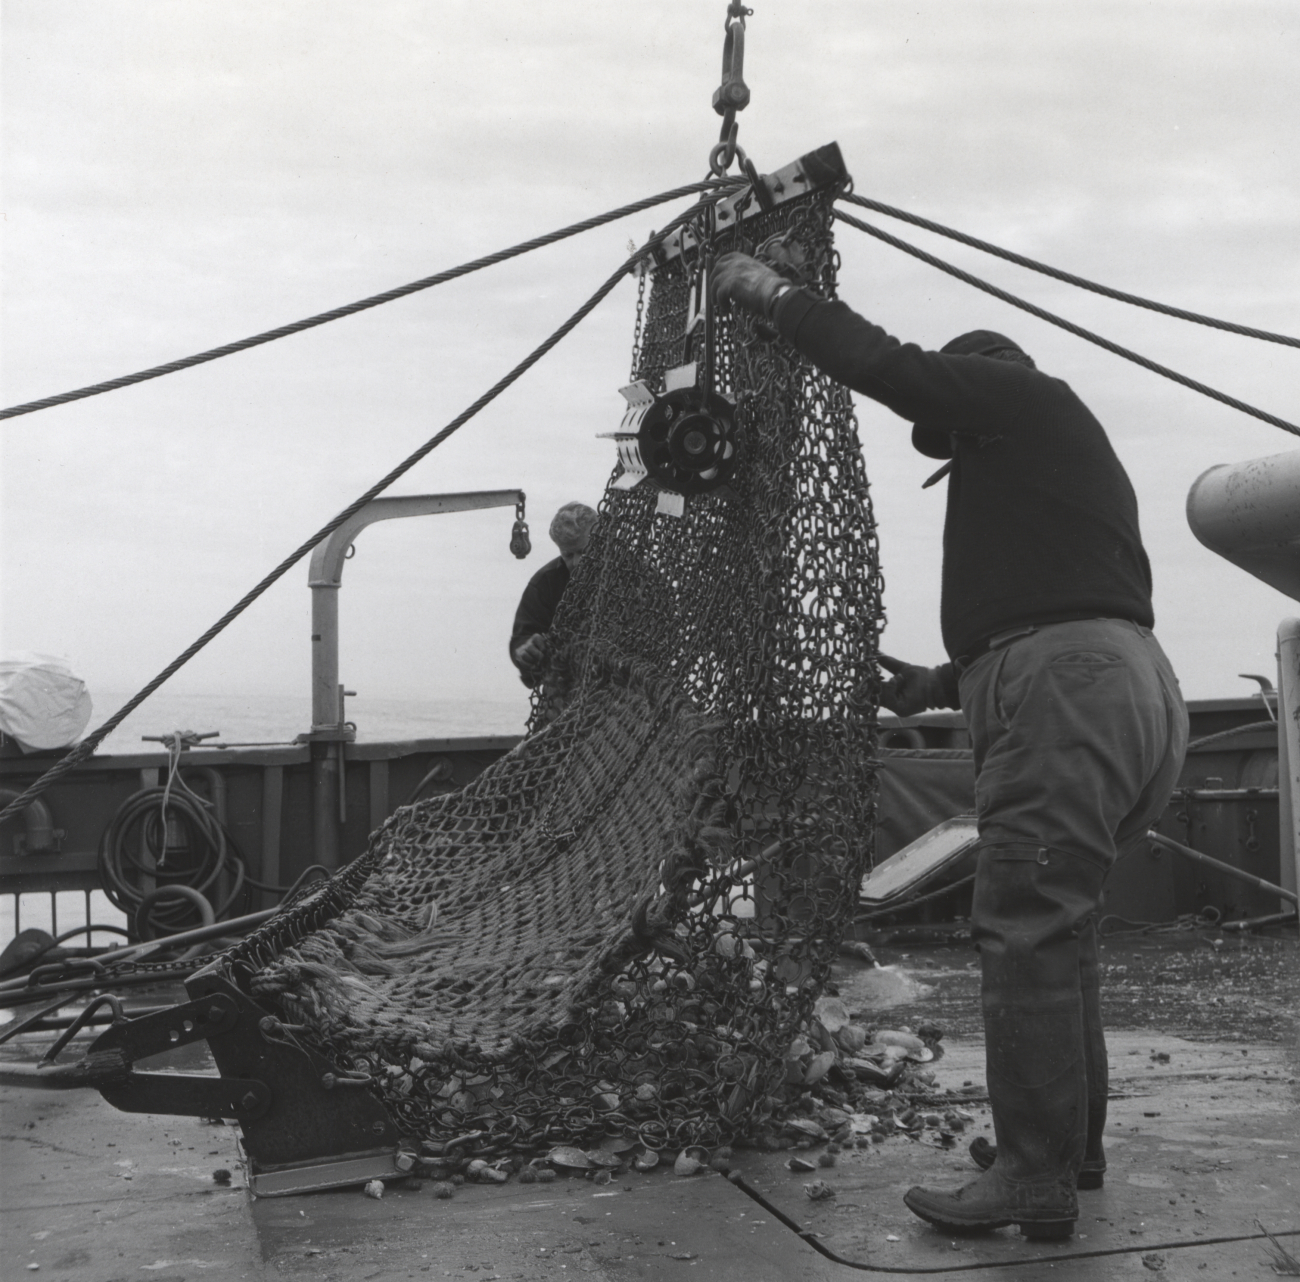 A scallop dredge being emptied on the BCF ship ALBATROSS IV